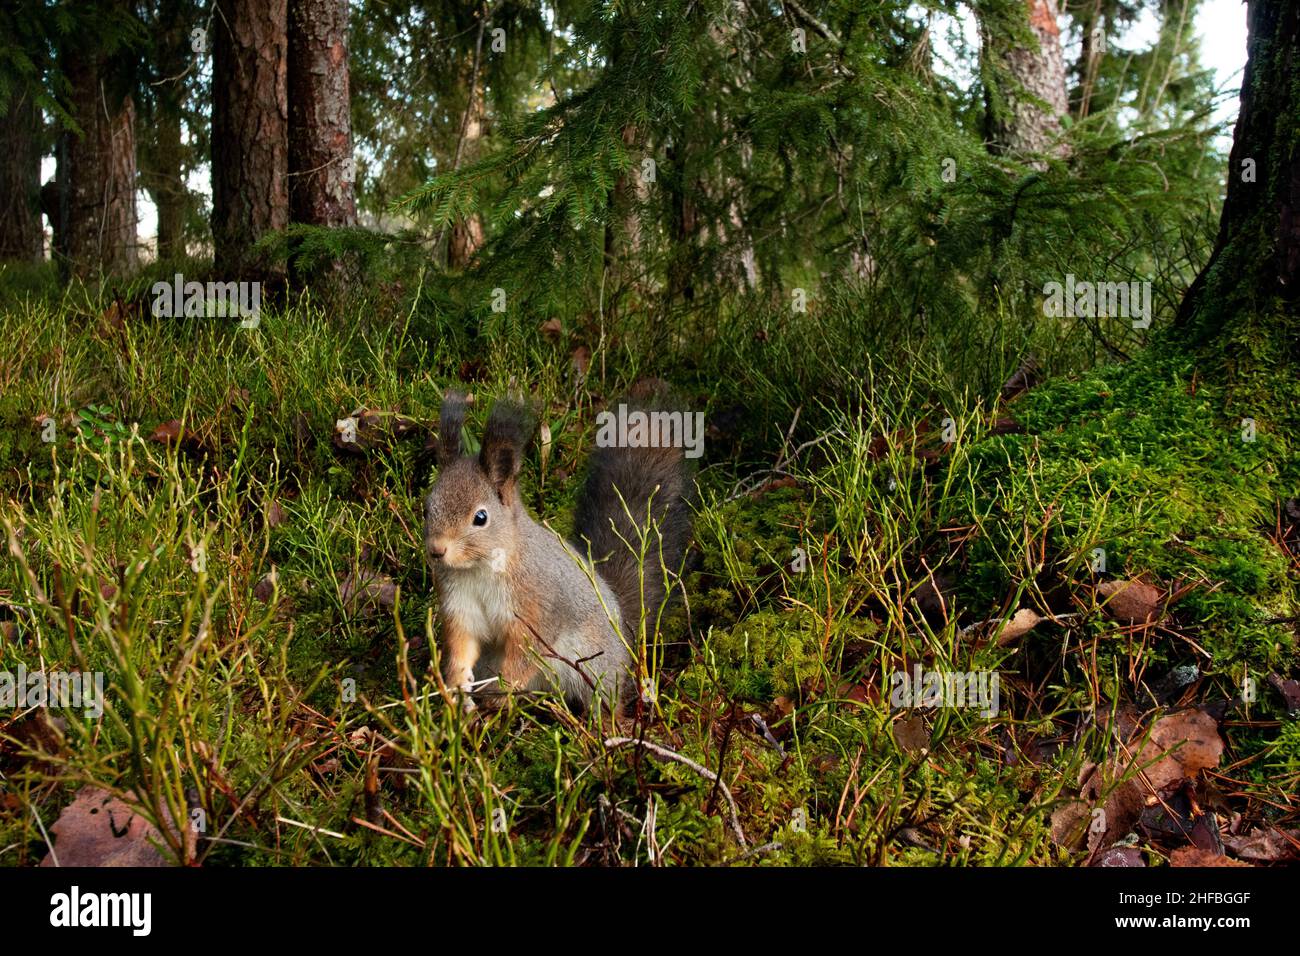 Wide-angle shot of Red squirrel searching for food on the forest floor in Estonian boreal forest. Stock Photo